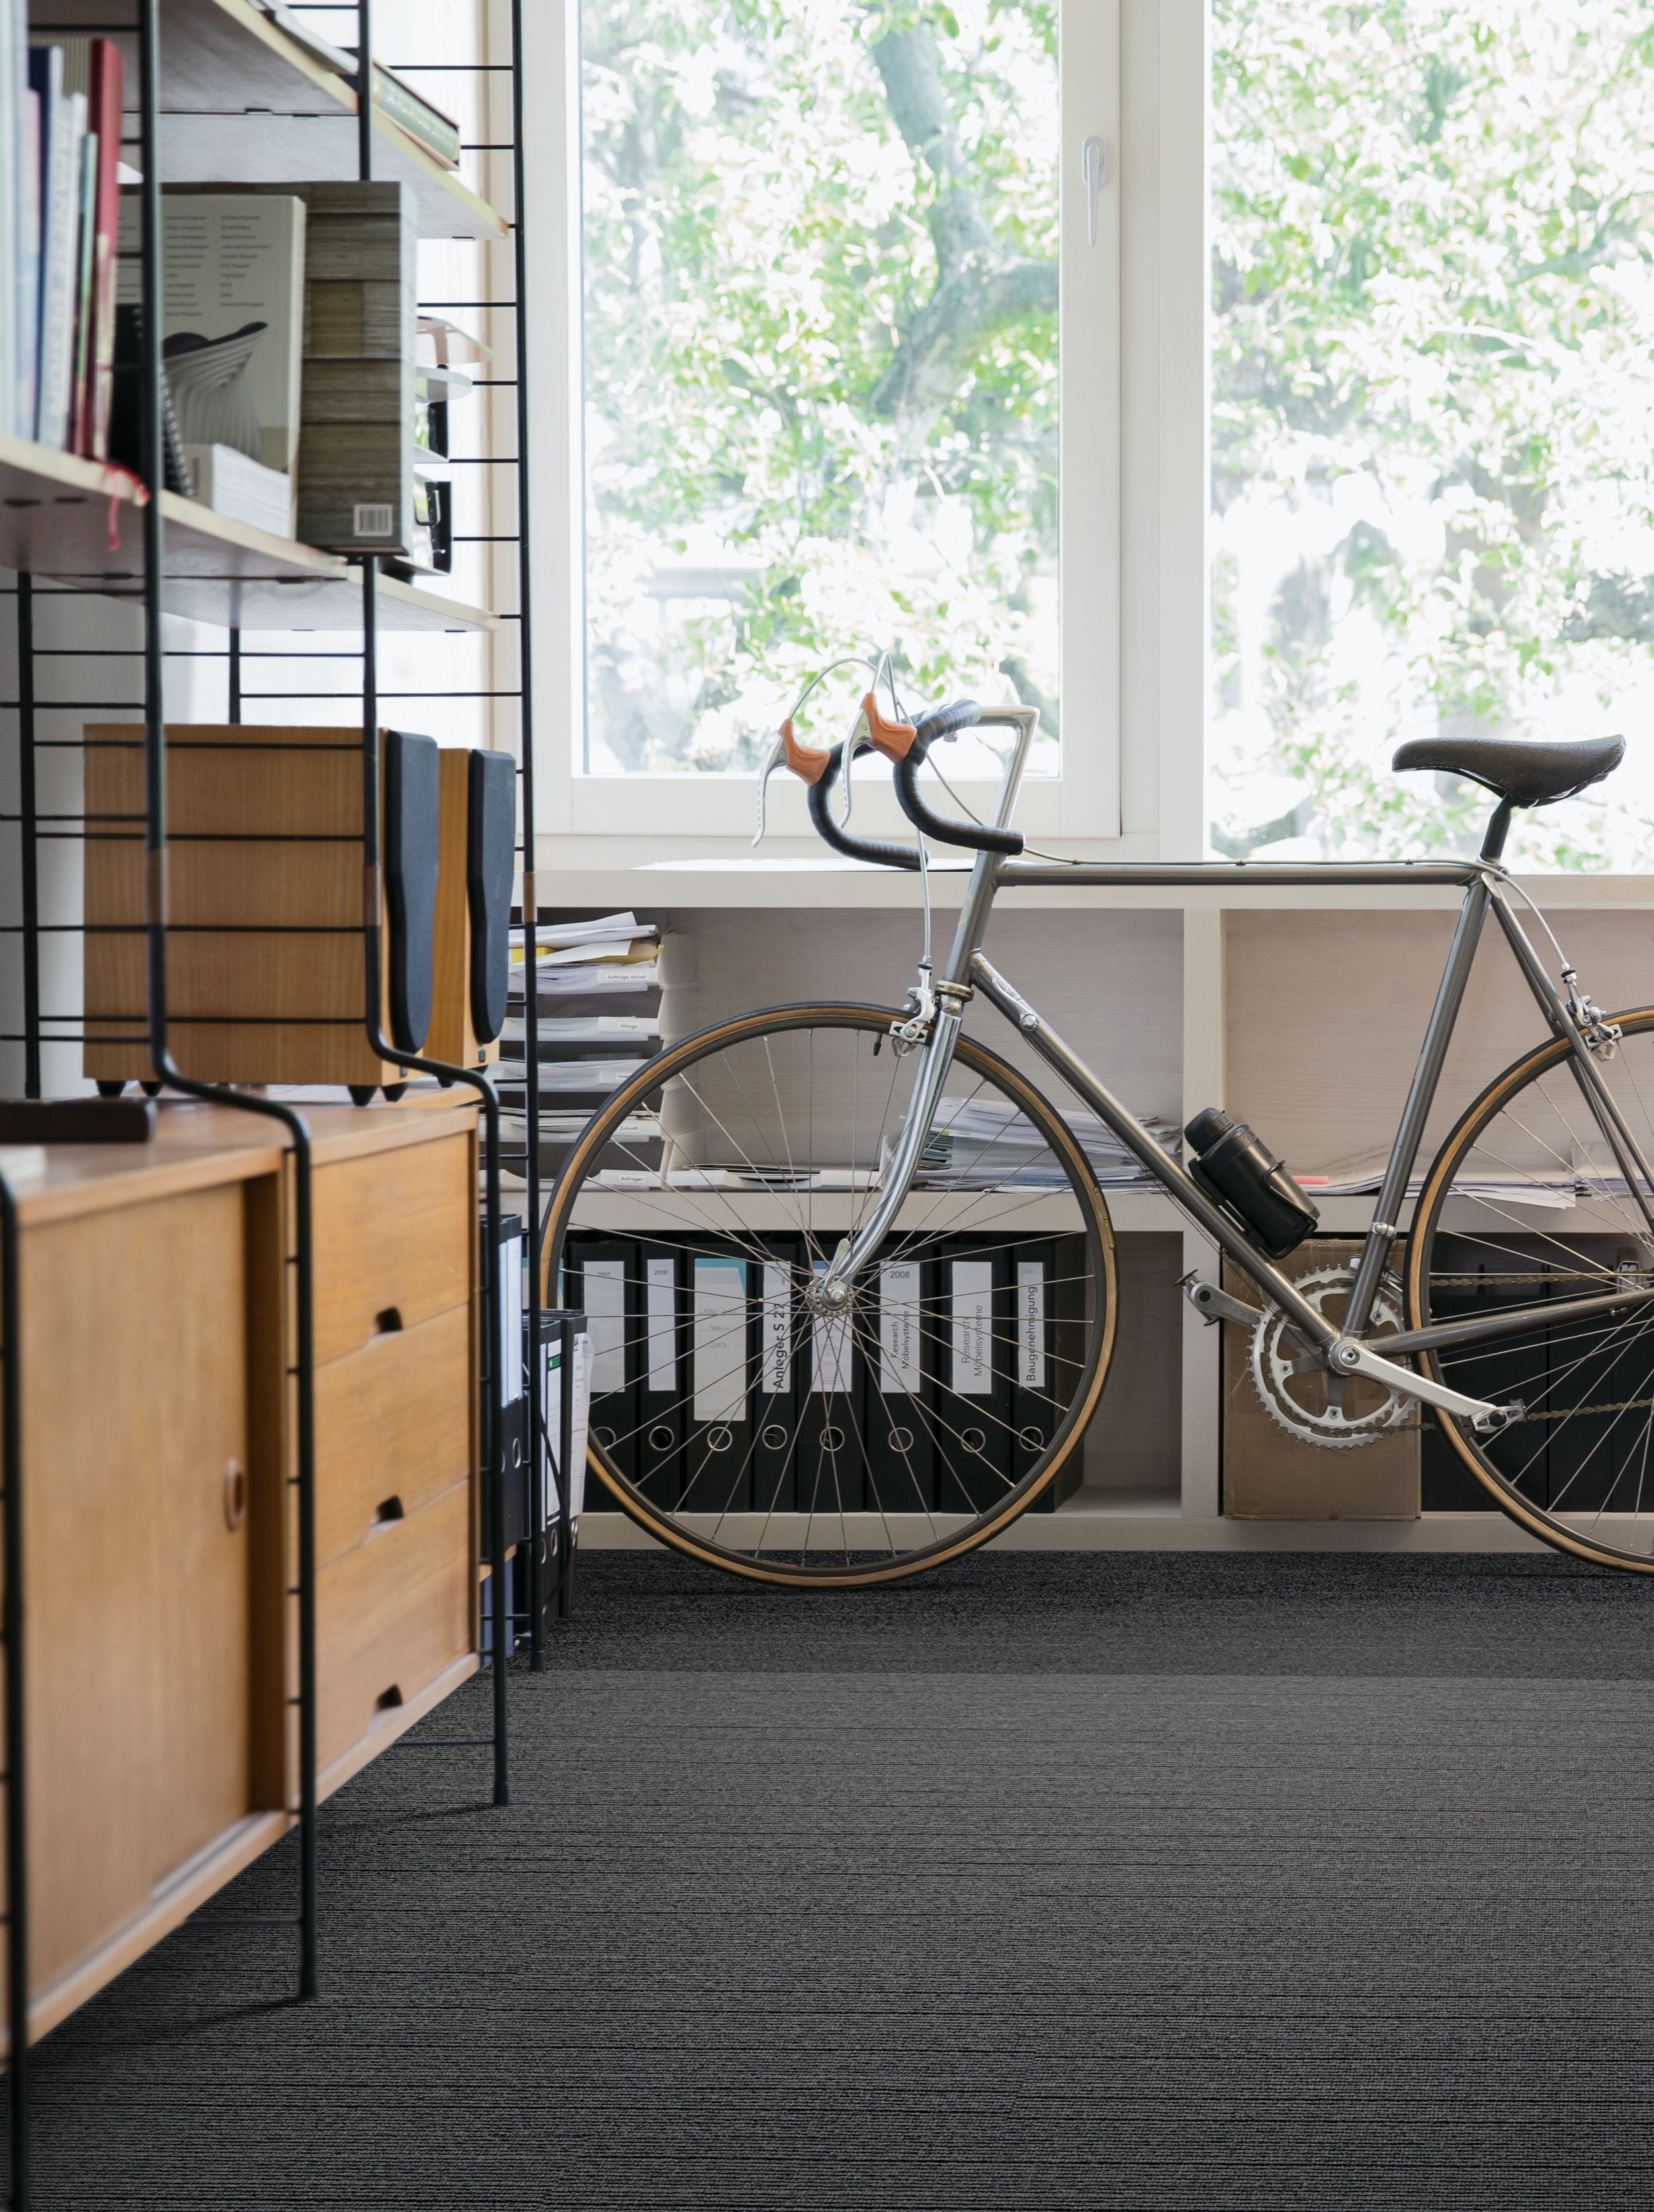 Interface YesterWeave plank carpet tile in office area with bike numéro d’image 1